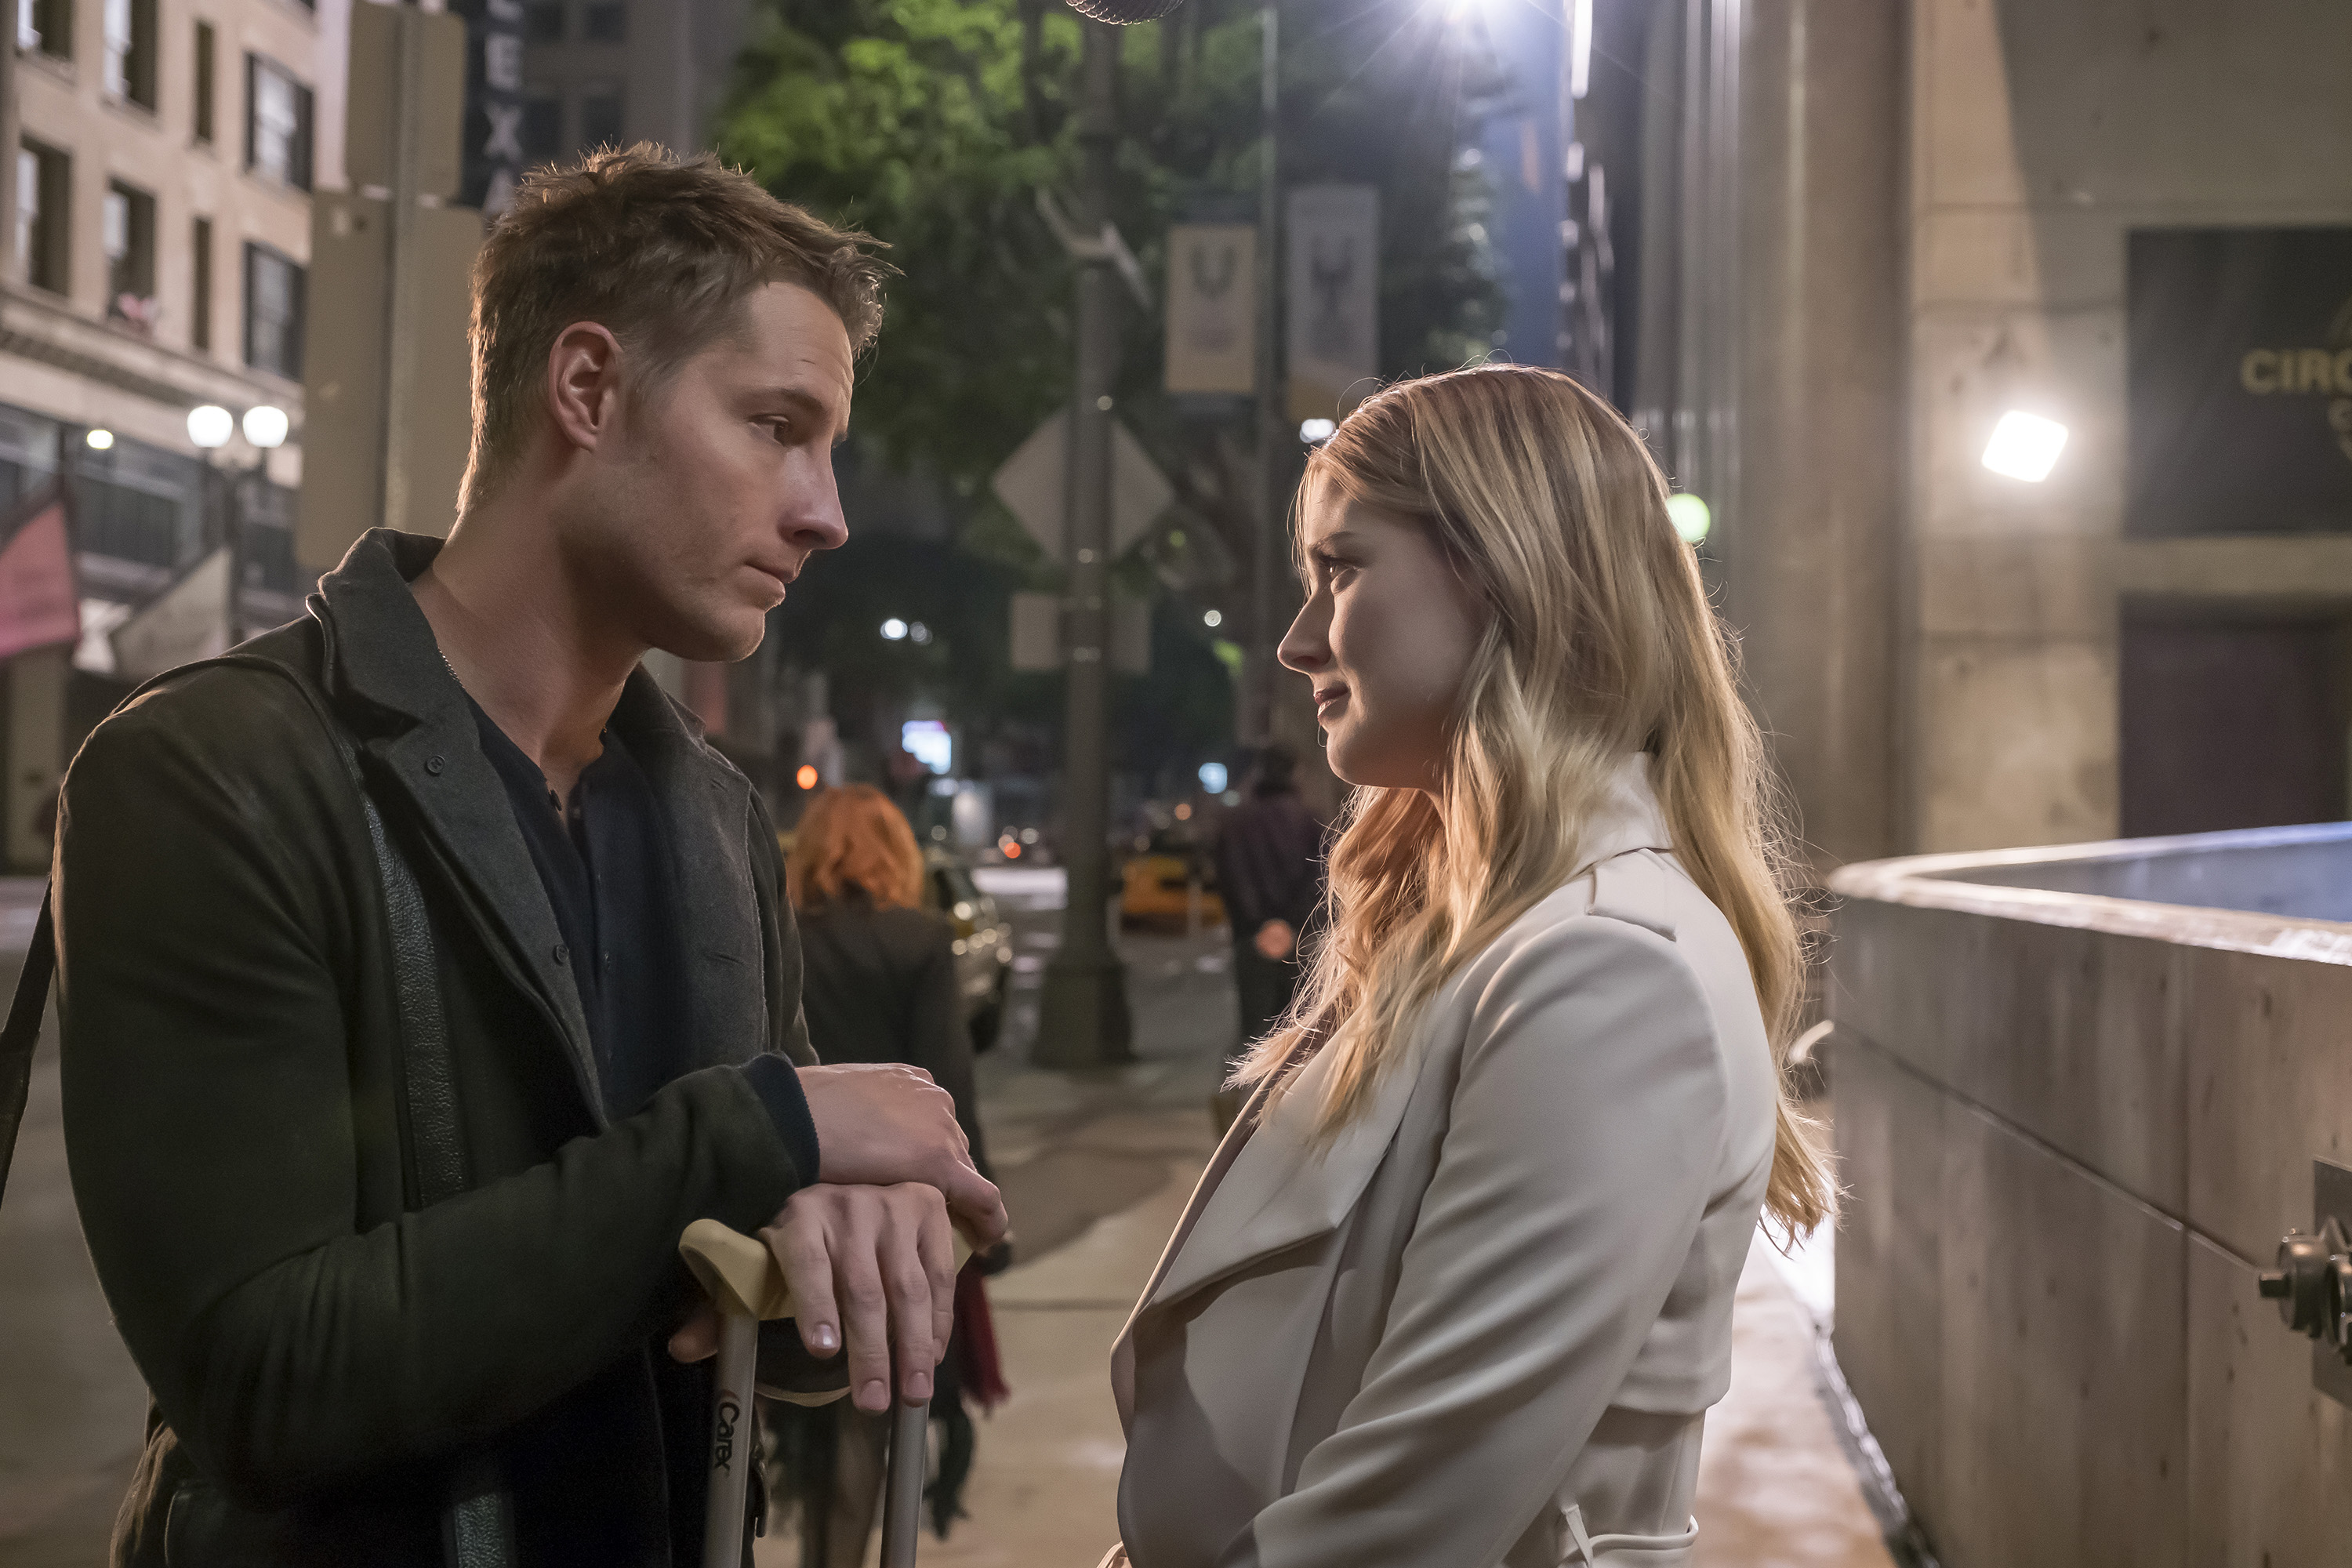 'This Is Us' Season 6 Episode 13 stars Justin Hartley and Alexandra Breckenridge, in character as Kevin and Sophie, share a scene. Kevin wears a dark gray coat over a blue shirt. Sophie wears a white coat.